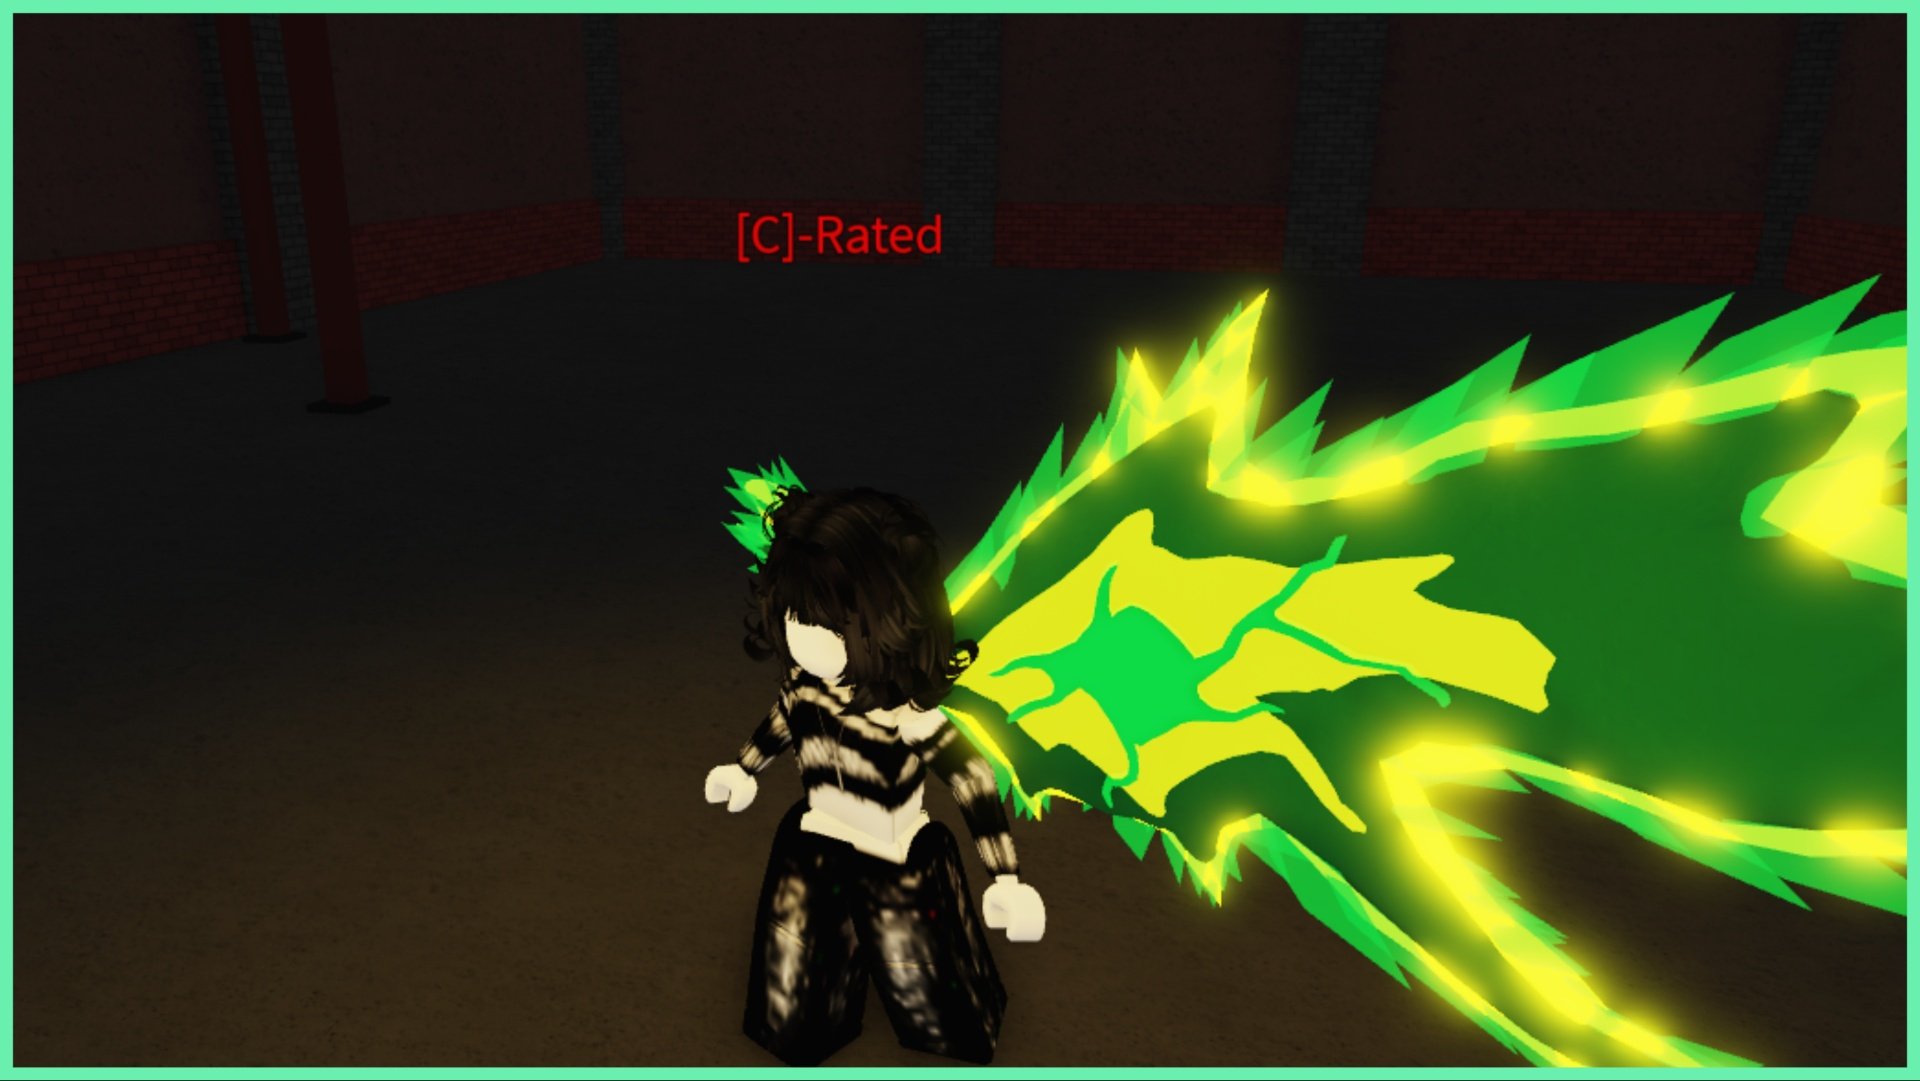 Feature image for our Ro Ghoul Quinques tier list showing my avatar who wears an emo-fashion all black and white outfit in a stance as a green flashing kagune emerges from her back in shades of radioactive green